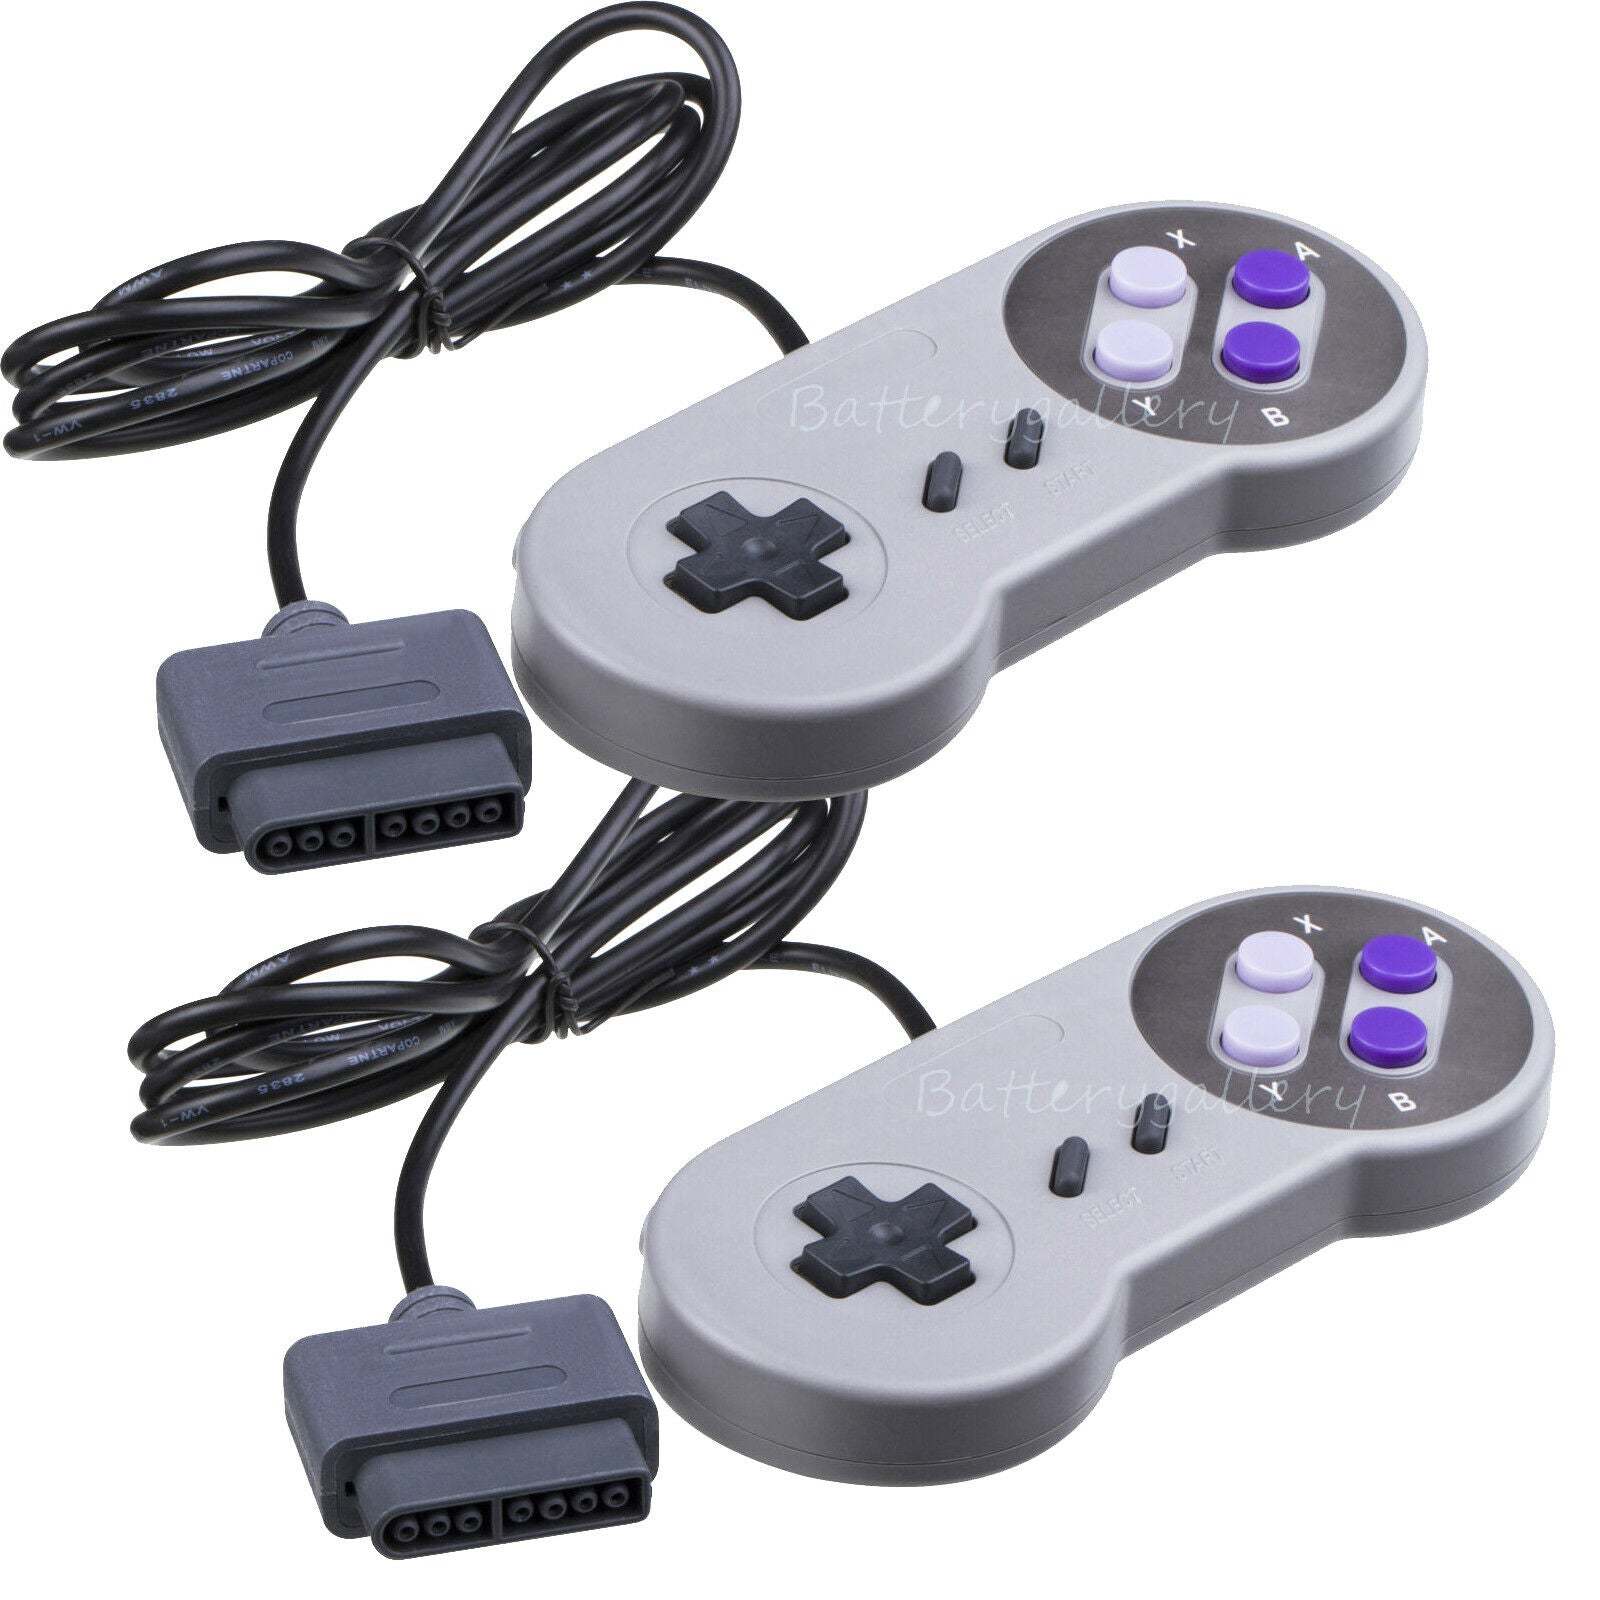 2 New Super Nintendo SNES System Console Replacement Controller 6FT for SNS-005